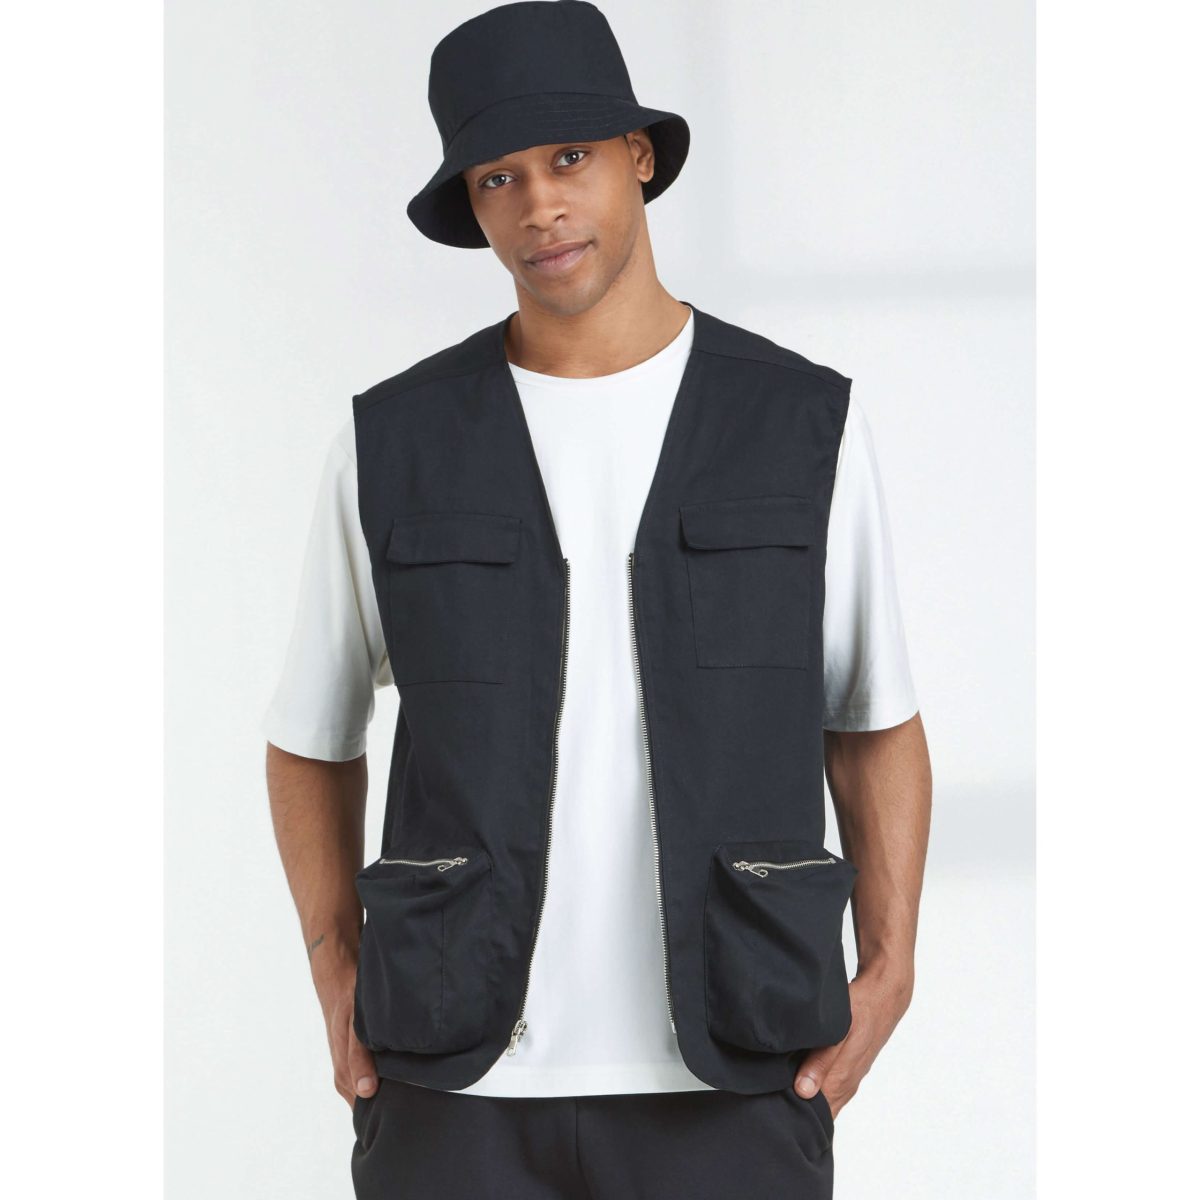 Simplicity Sewing Pattern S9651 Men's Knit Top, Waistcoat and Hat